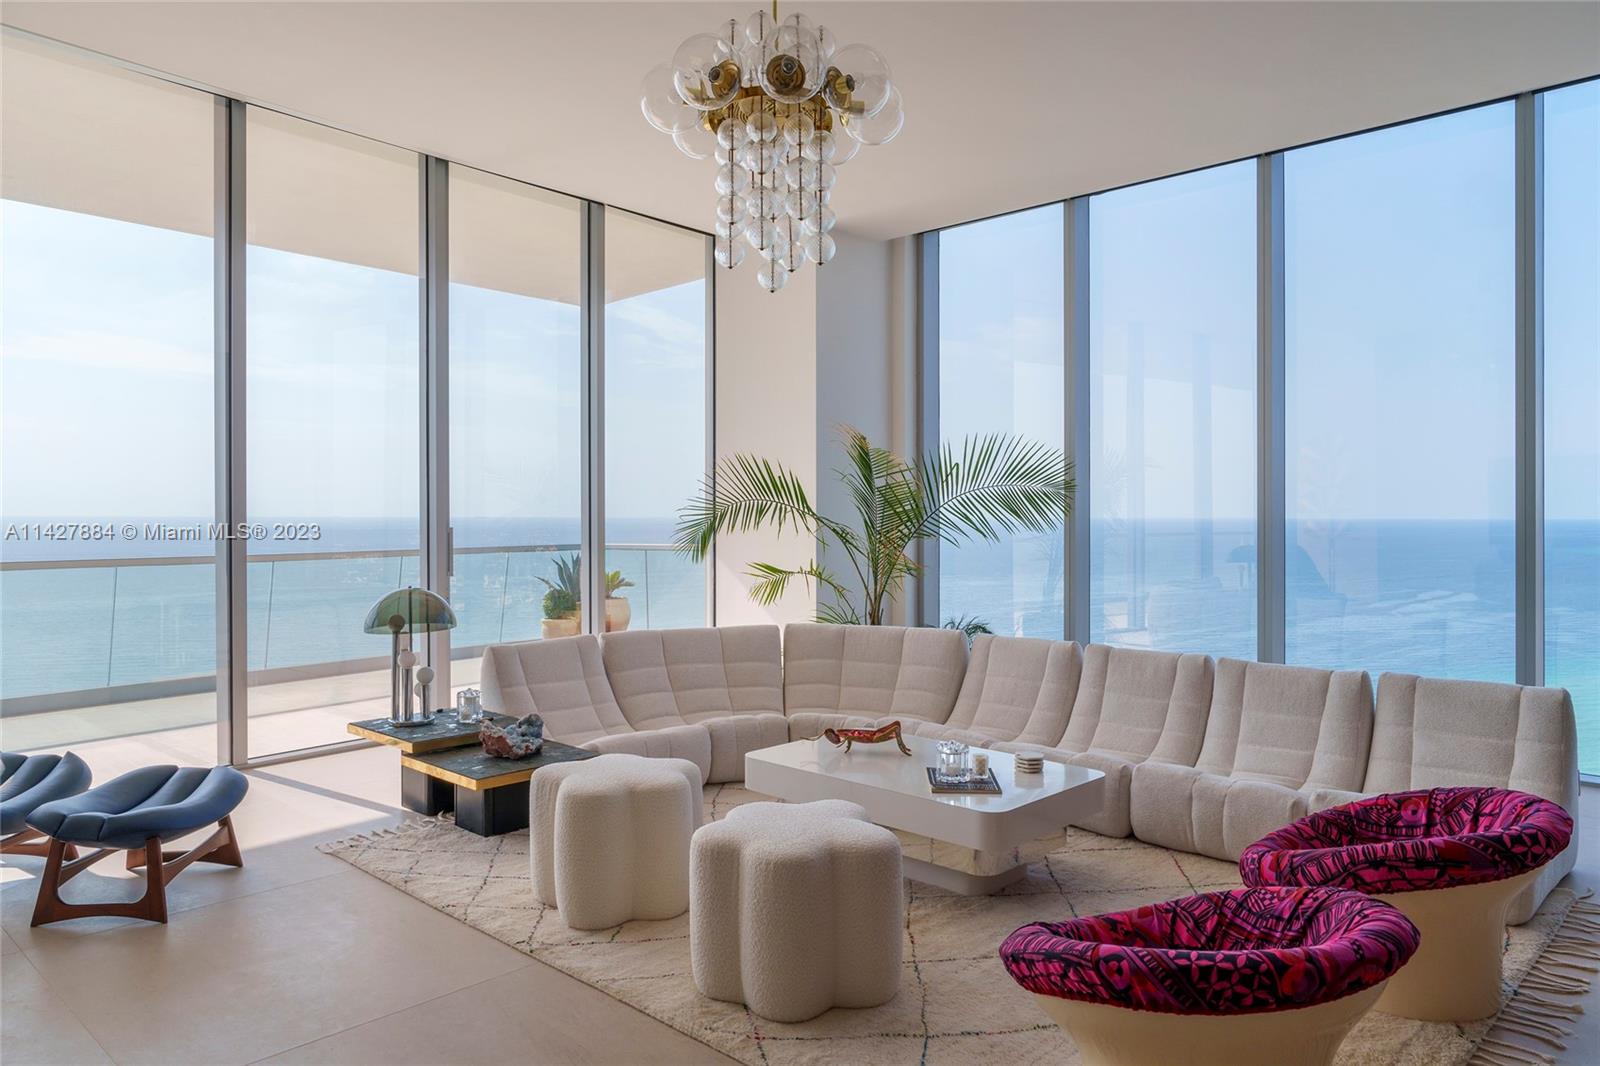 A space where nature, culture & modern architecture collide amidst the untamed allure of Miami. A southeast corner unit on the 42nd floor with sunrise & sunset terraces and unobstructed ocean views - this immaculate unit exudes a coastal vibe featuring stone & oak floors, an open dining area & chef’s kitchen and 12-ft ceilings. Designed with both function & style in mind, the kitchen offers custom jade countertops and Snaidero cabinetry, Miele, Viking & True appliances. The light-filled space wrapped in glass accesses the oceanside terrace for indoor-outdoor living. A secluded principal suite provides an ocean-view escape, custom walk-in closets & spa bathroom. 3 additional bedrooms & en-suite bathrooms offer a private respite to enjoy peaceful bayside terraces.